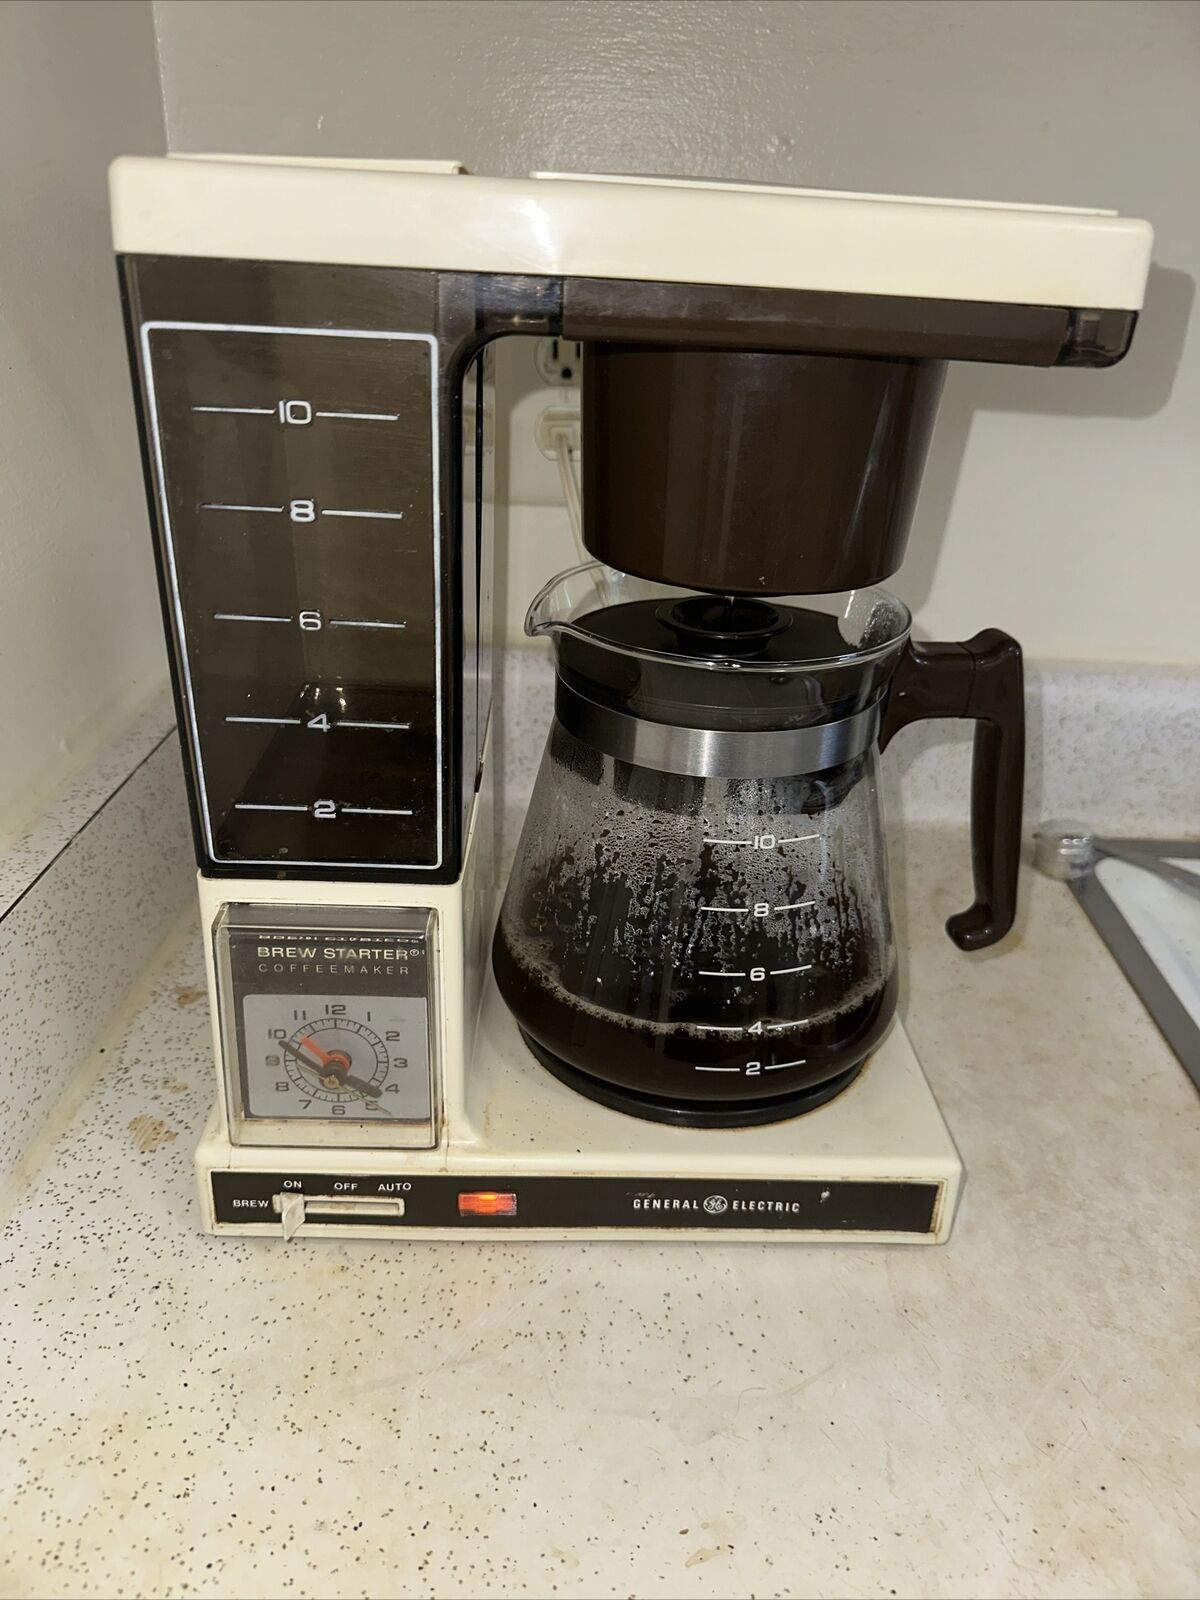 General Electric Brew Starter 10 Cup Auto Drip Coffee Maker Vintage Refurbished